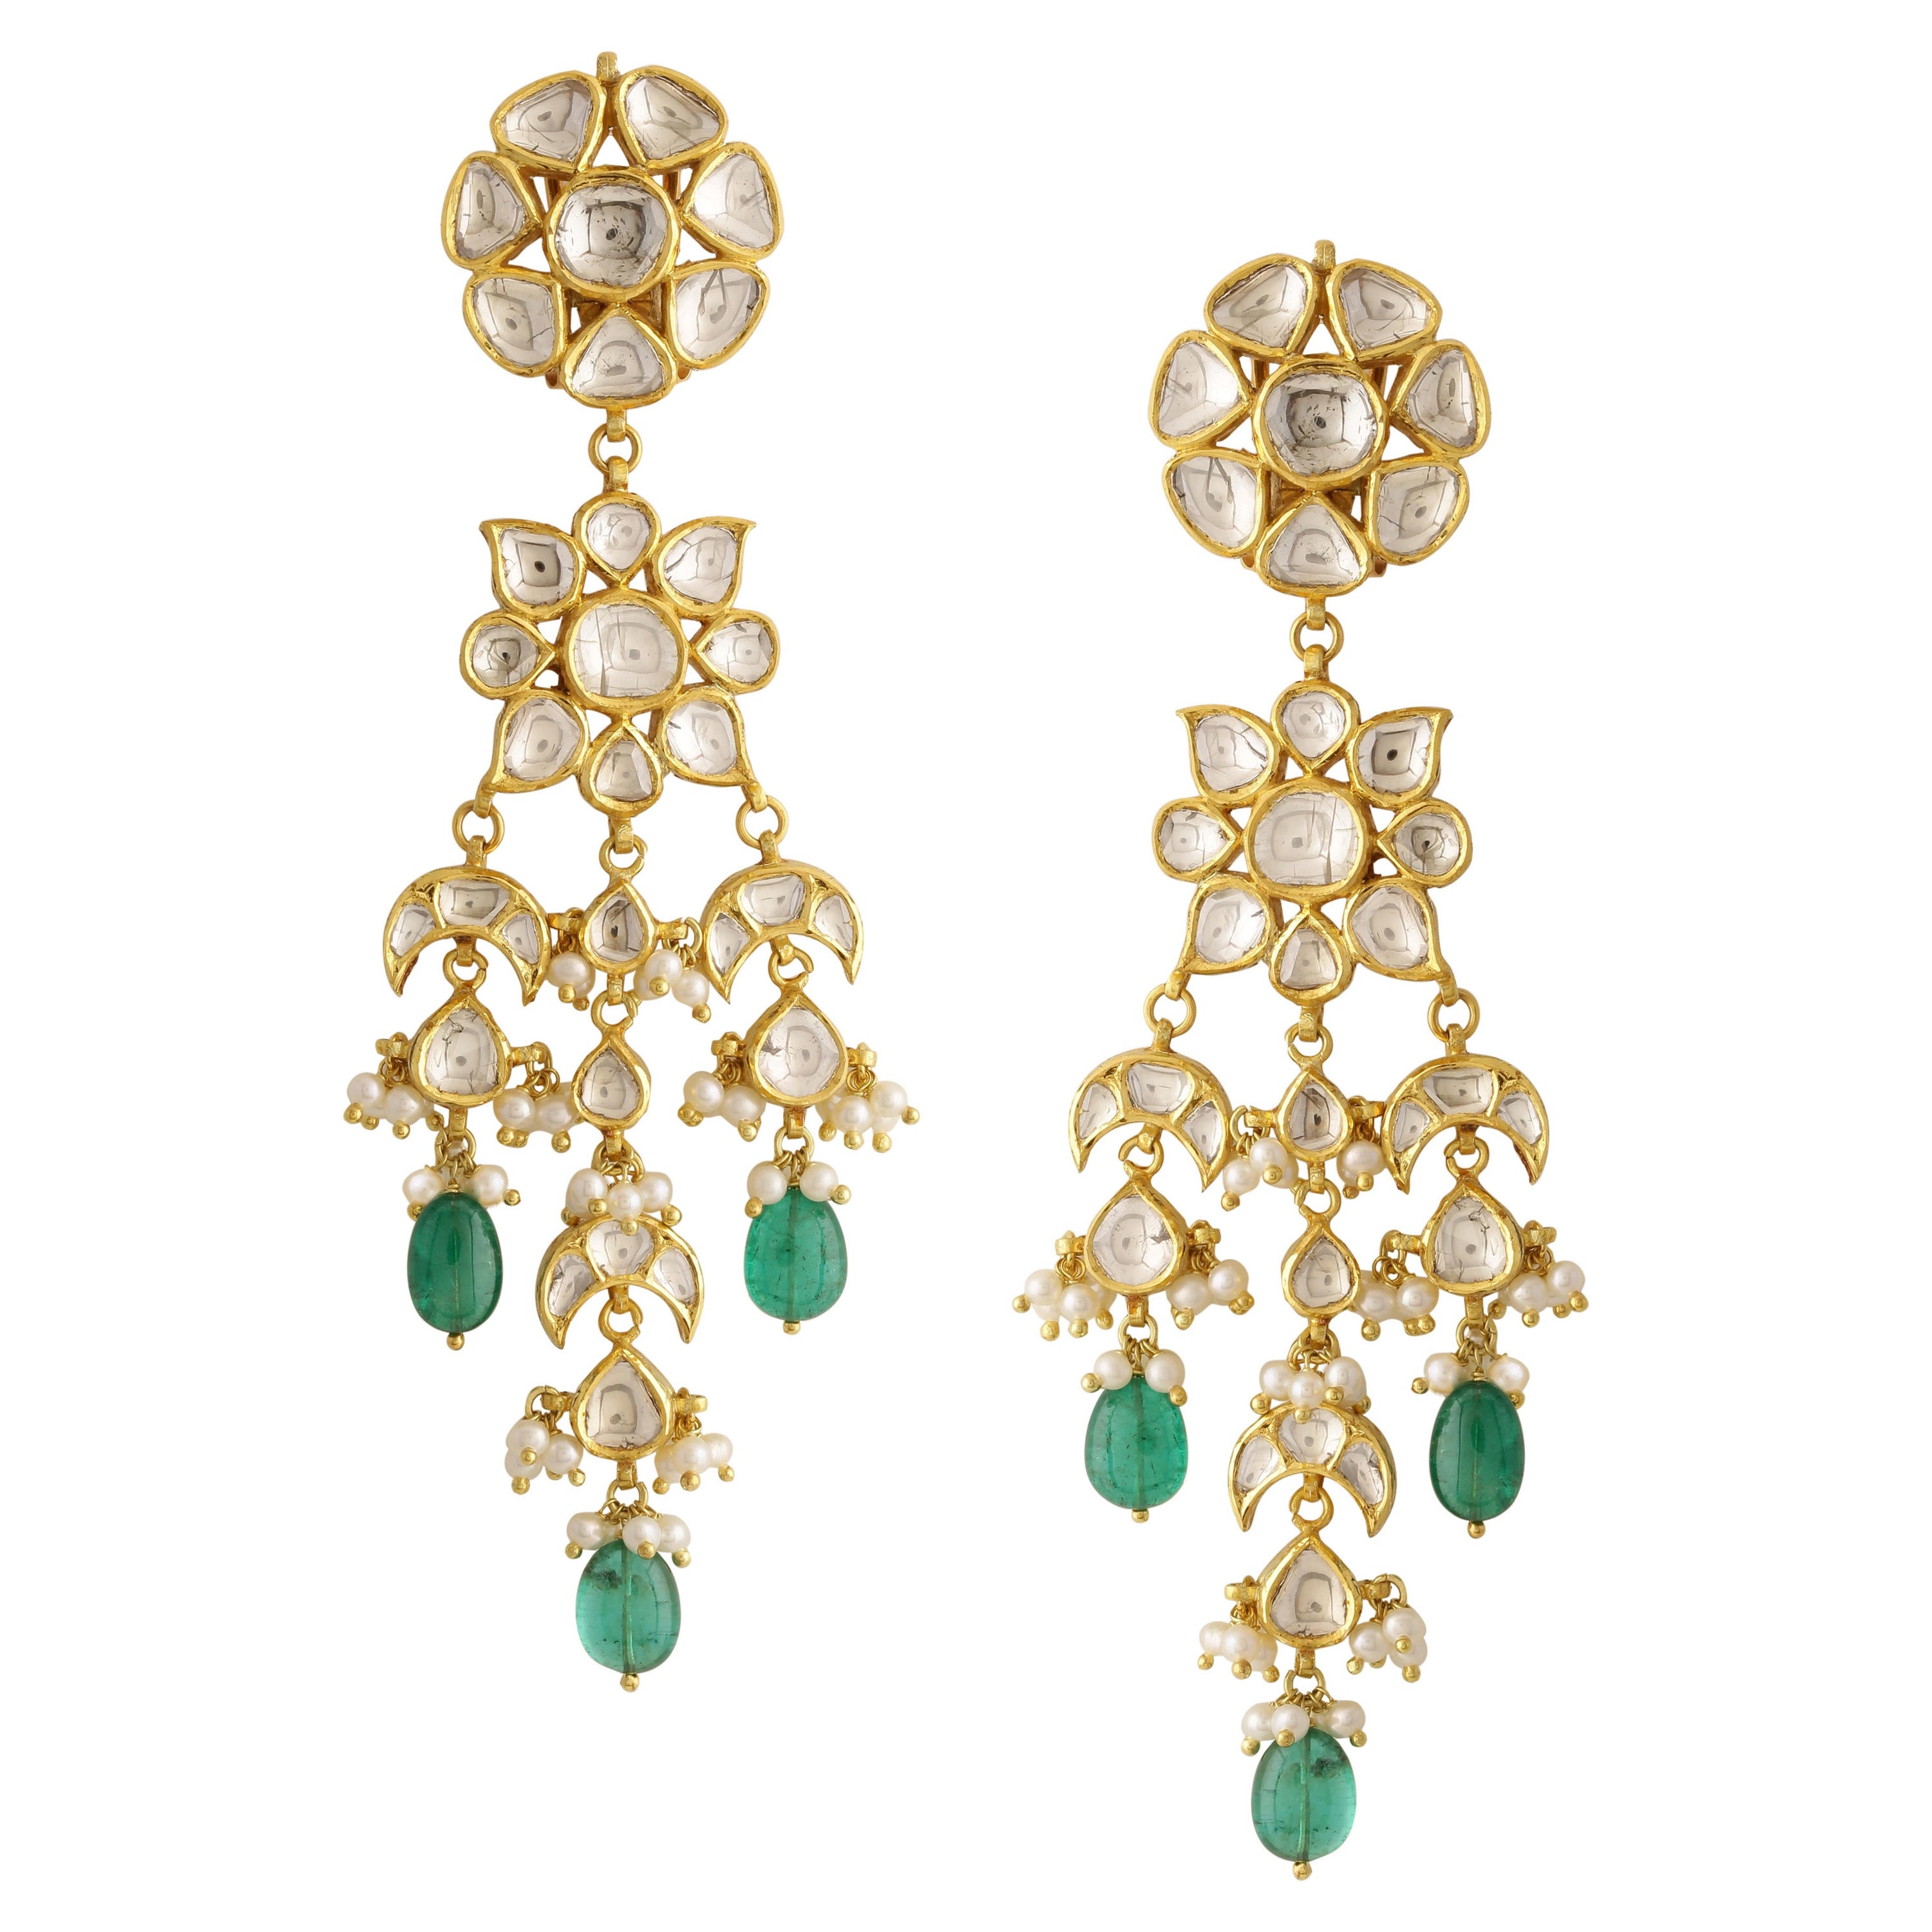 Diamonds and Emerald Chandelier Earring Handcrafted in 18K Gold with Fine Enamel For Sale